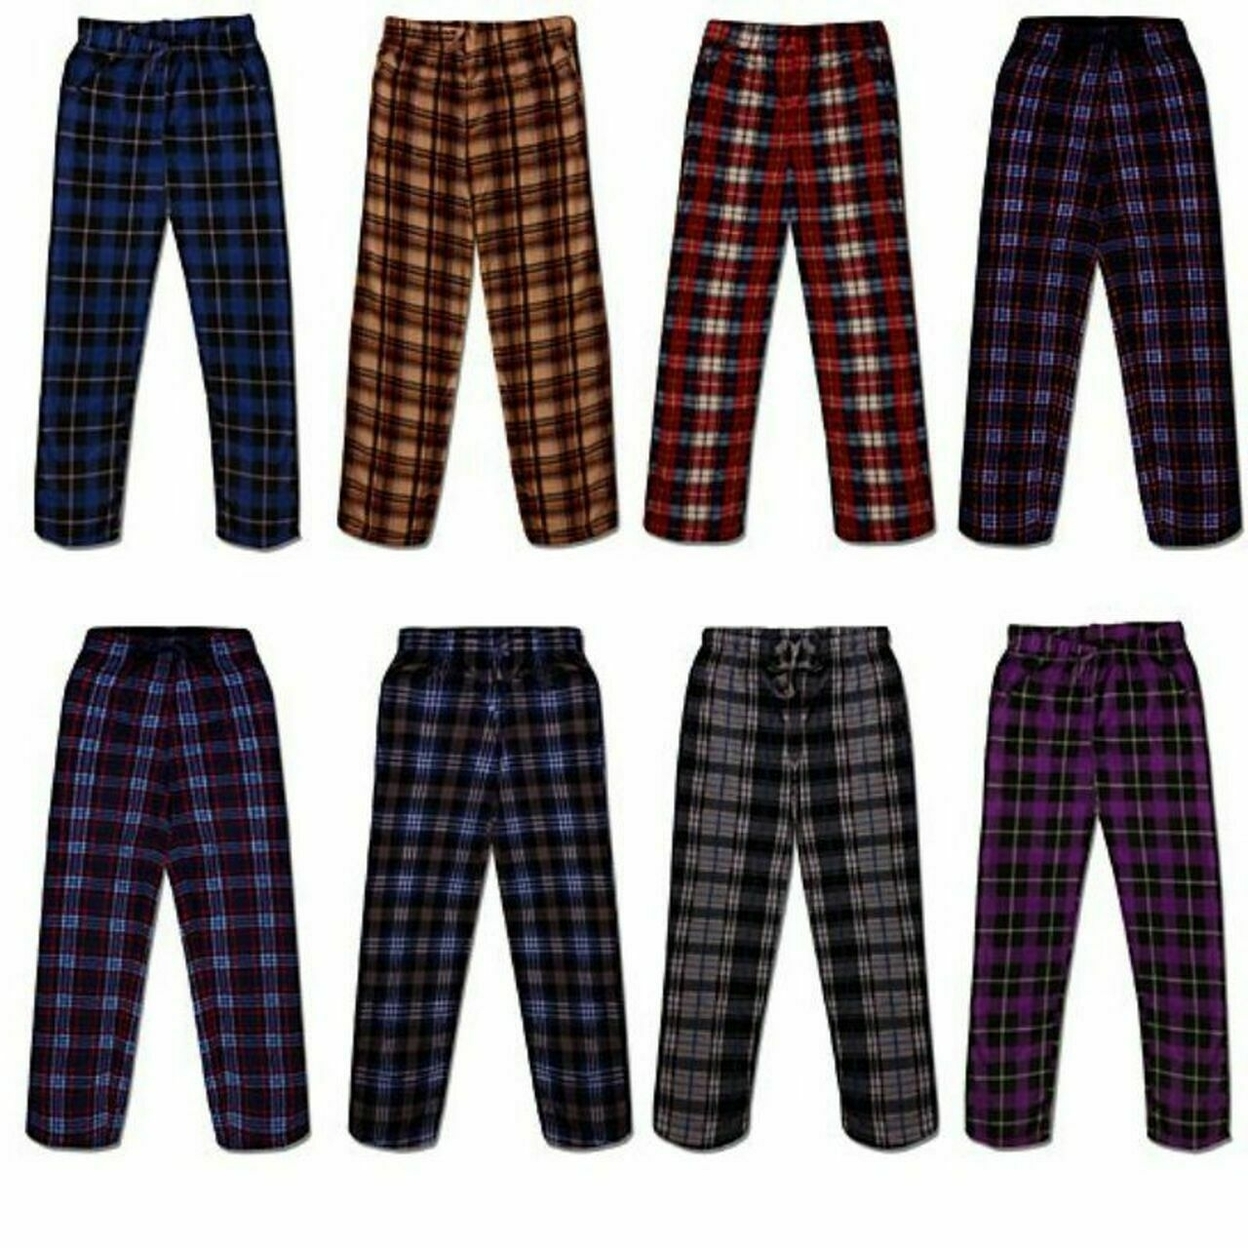 2-Pack: Men's Ultra Soft Cozy Flannel Fleece Plaid Pajama Sleep Bottom Lounge Pants - Red & Red, X-large